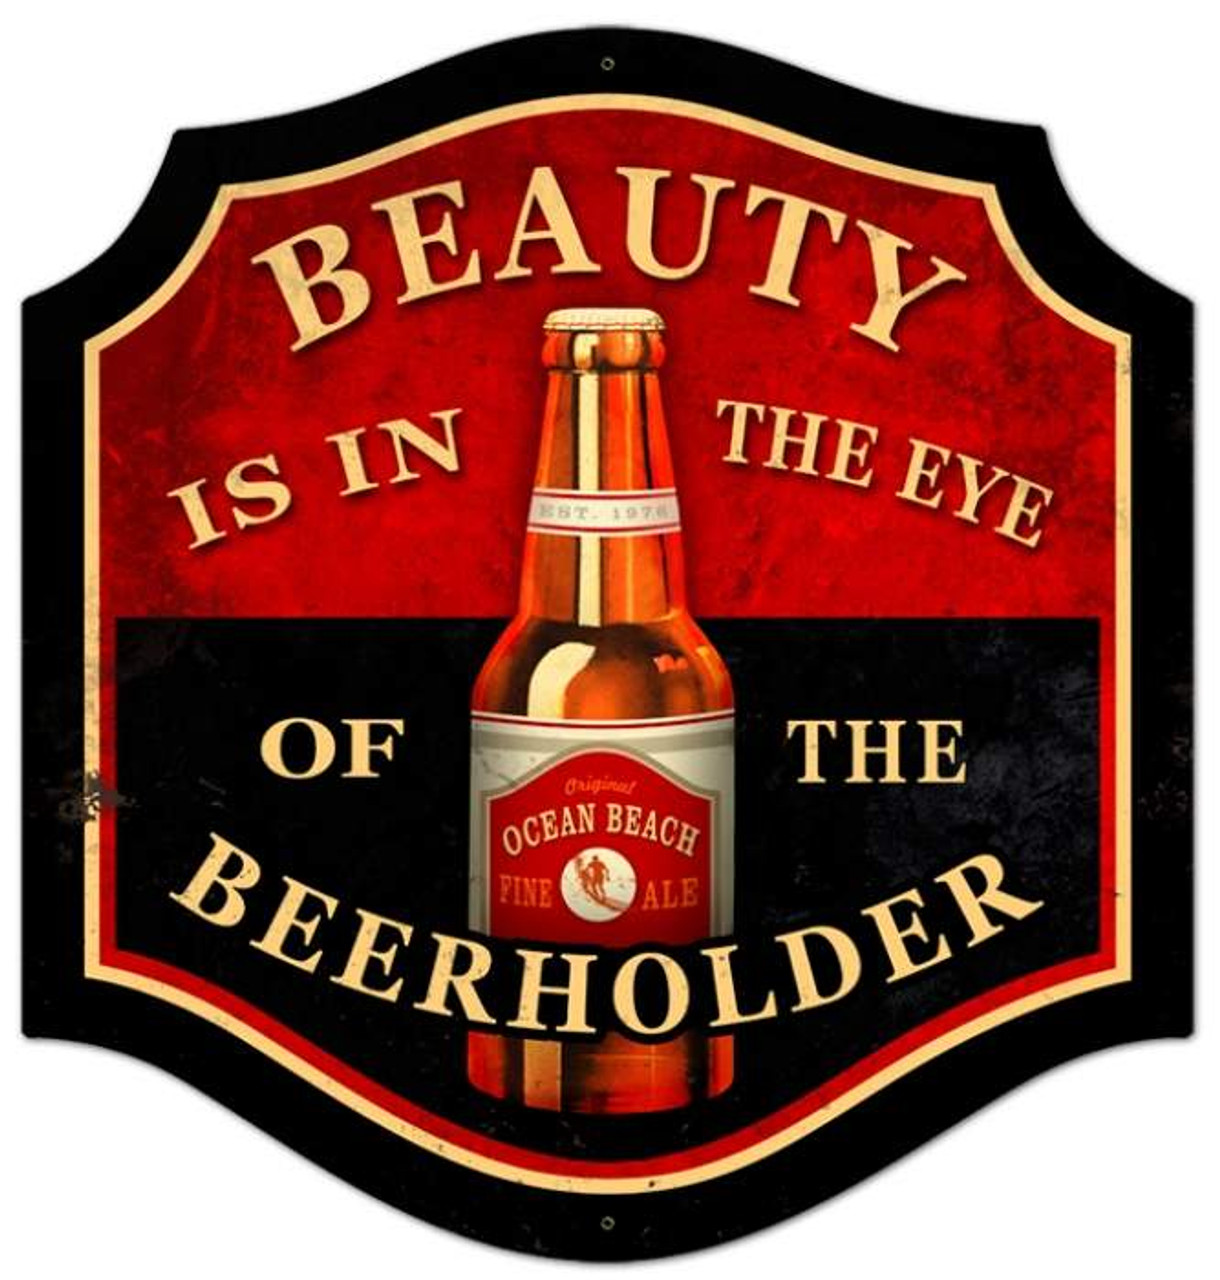 Retro Beauty Beer Holder Metal Sign 20x20 Inches